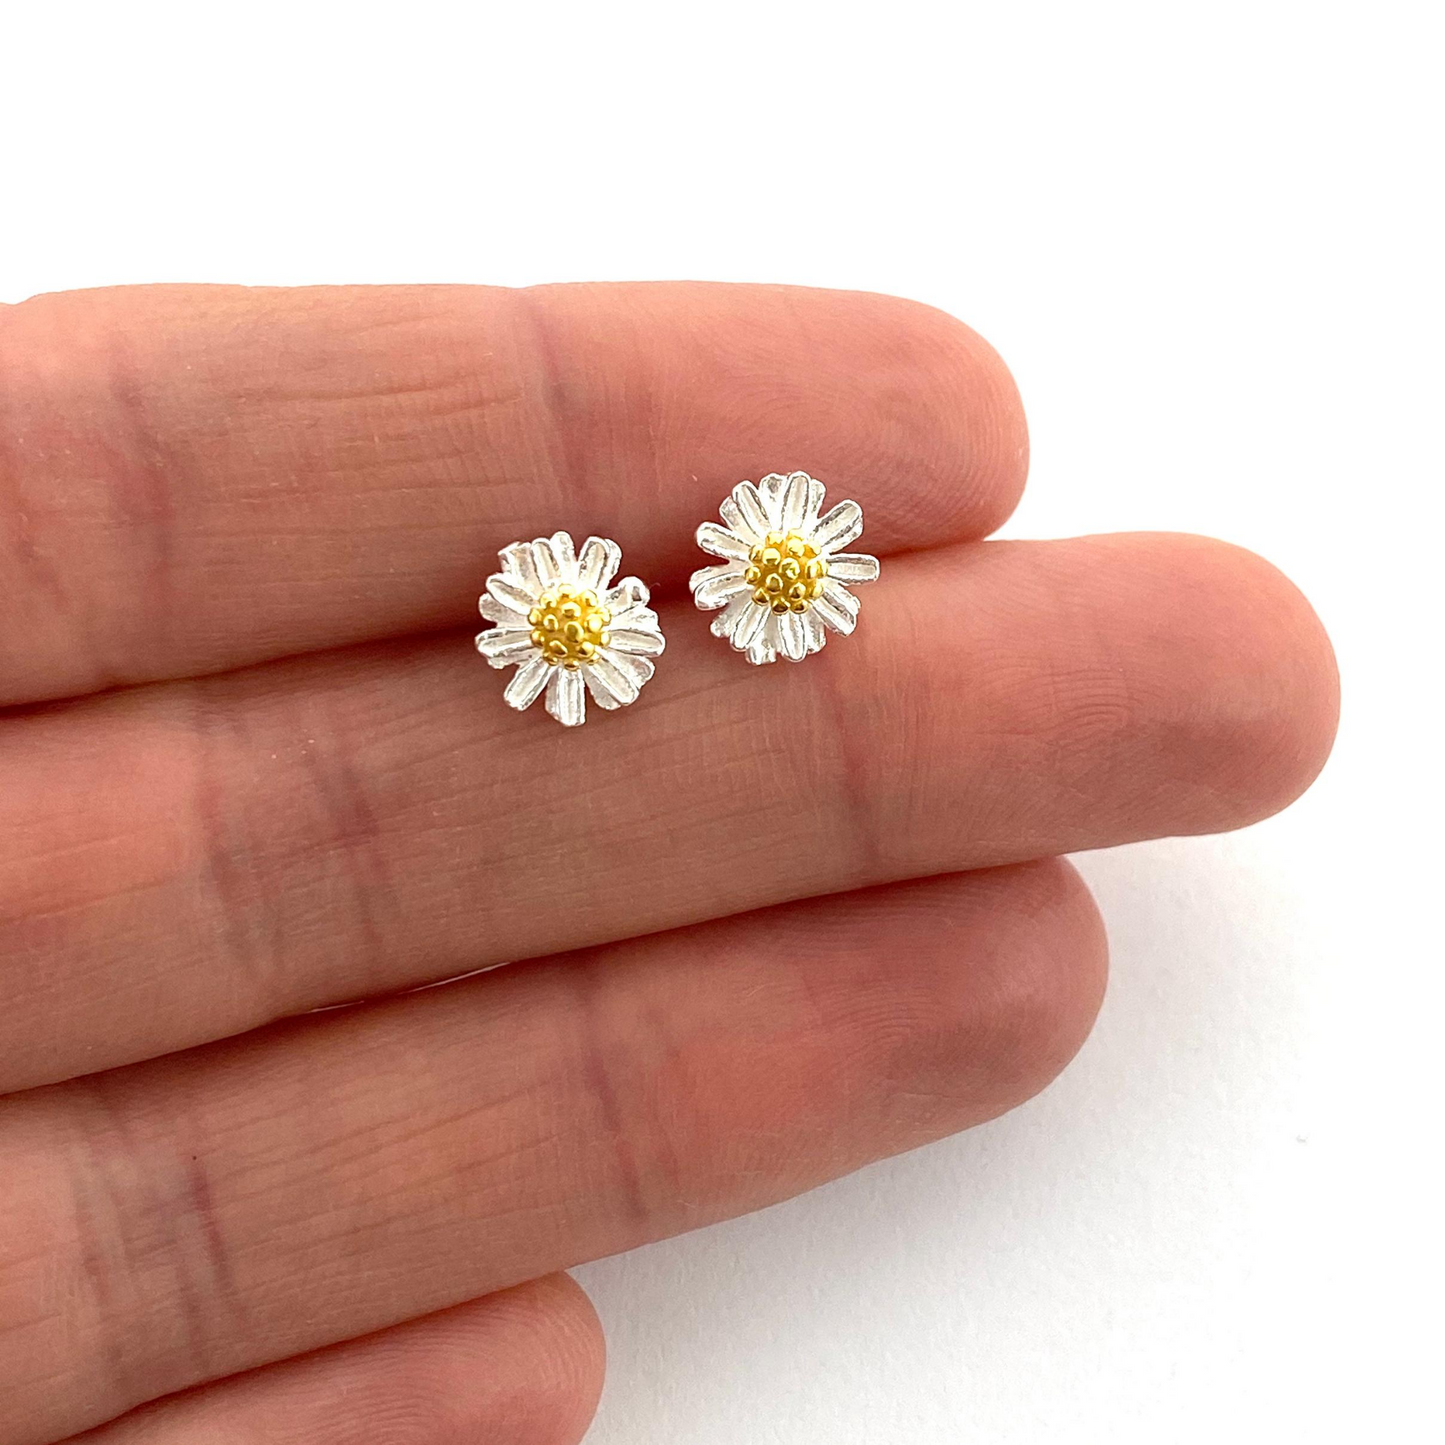 Silver & Gold Daisy Studs